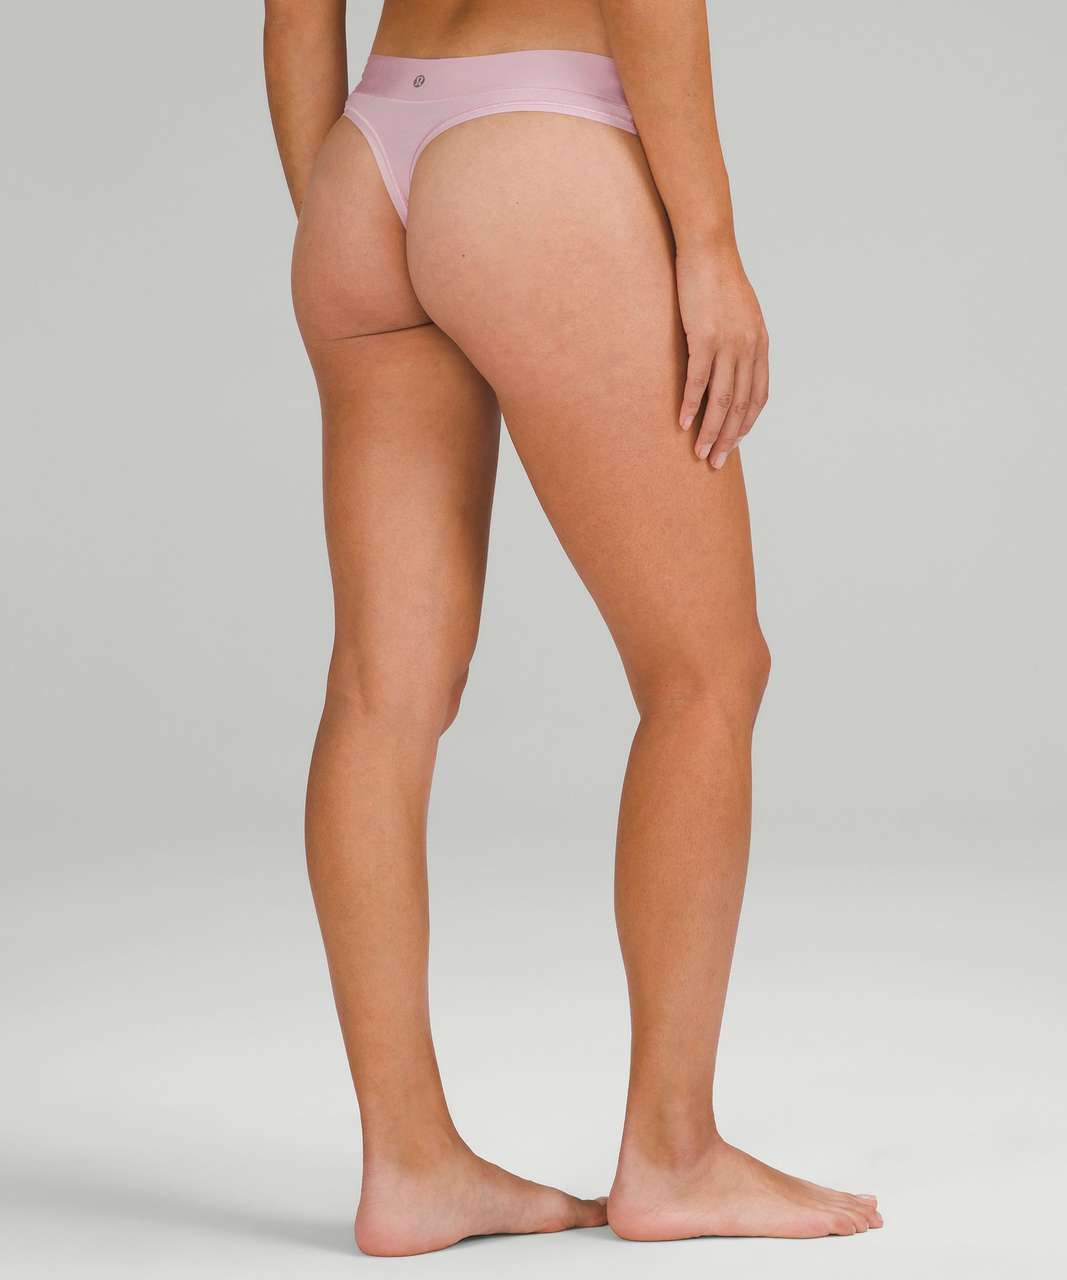 Lululemon UnderEase Mid-Rise Thong Underwear 3 Pack - Gull Grey / Pink Peony / Cayenne